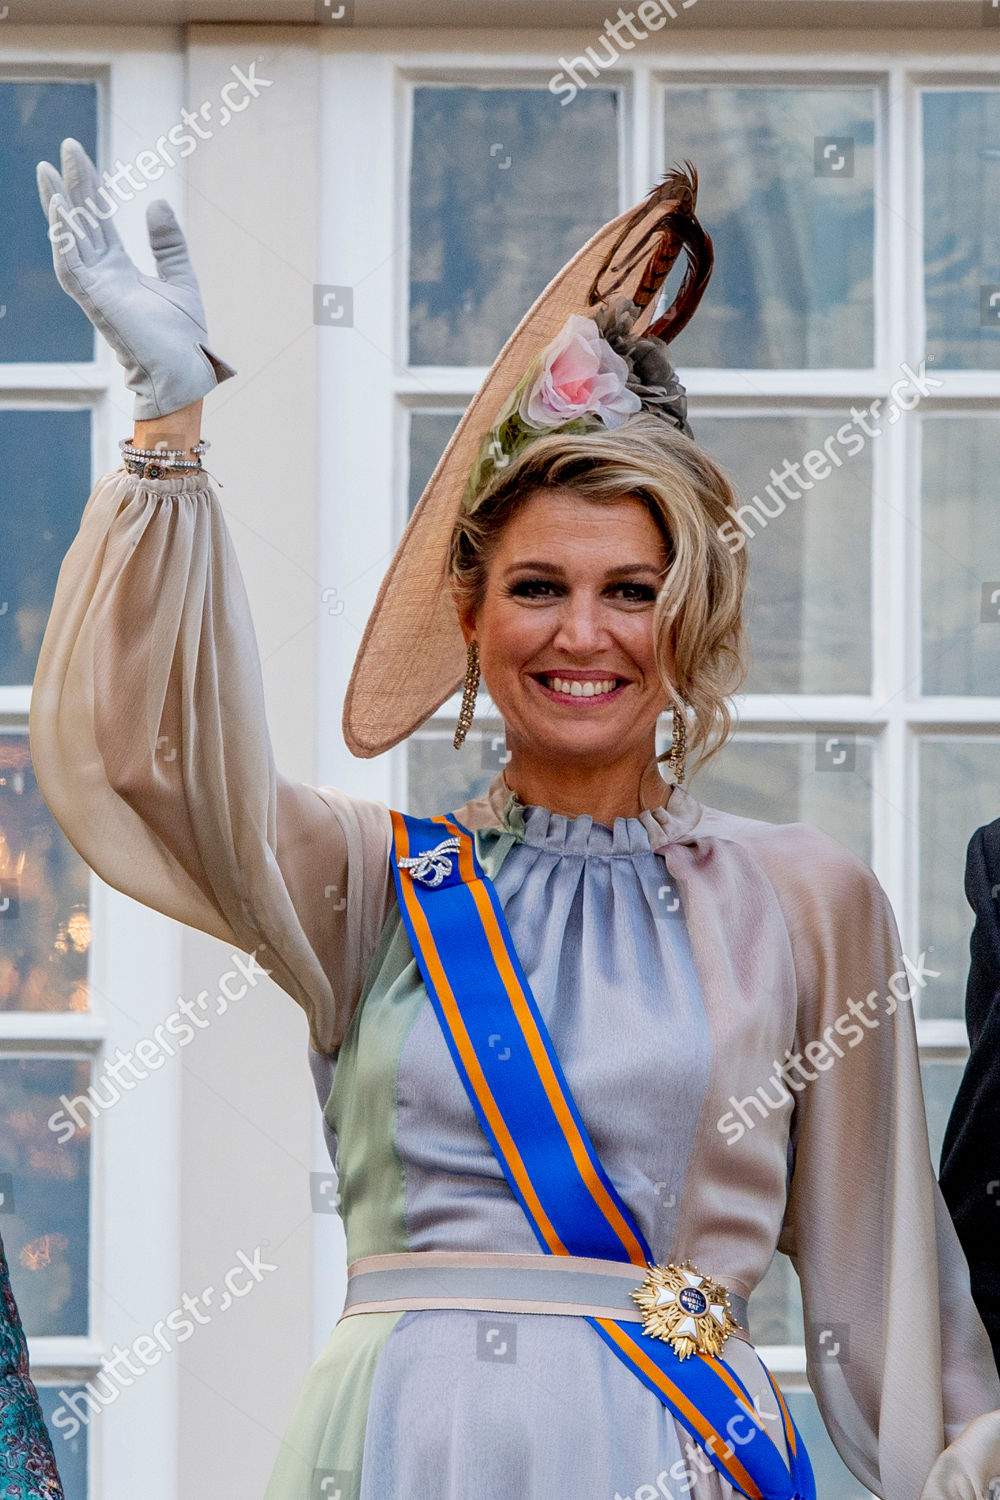 opening-of-the-parliamentary-season-the-hague-the-netherlands-shutterstock-editorial-9885898ab.jpg